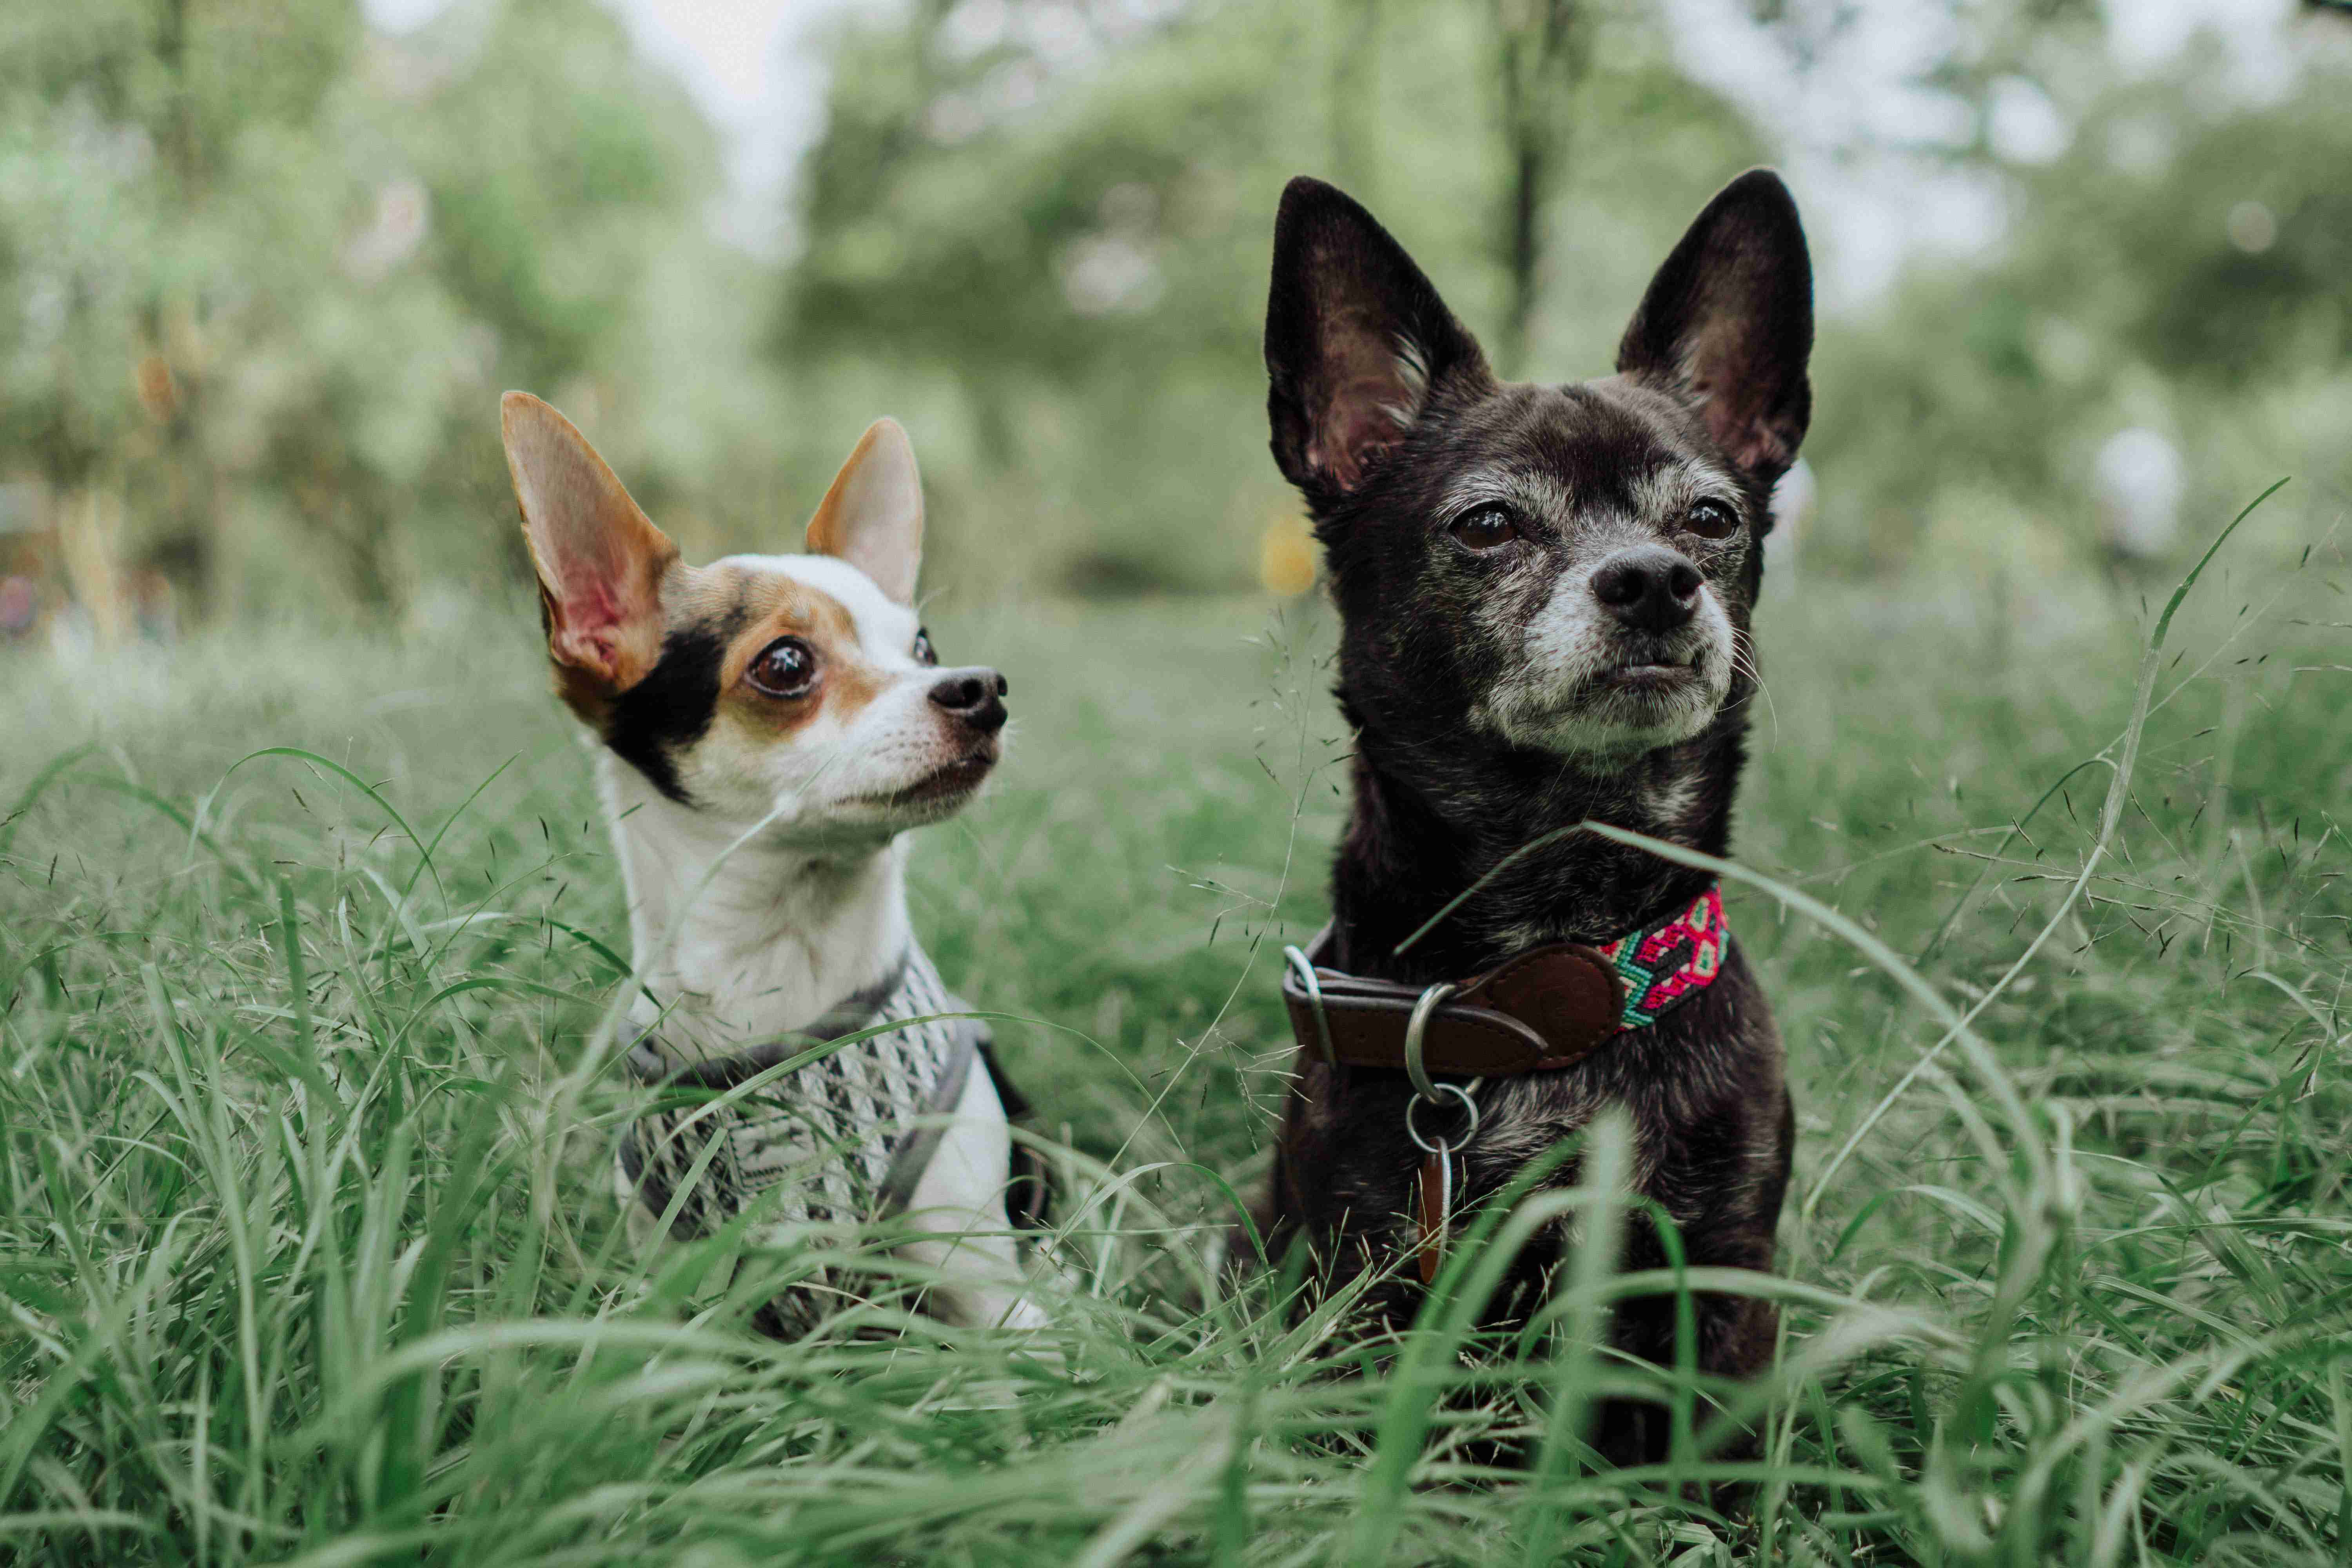 What are some effective ways to redirect a Chihuahua's aggressive behavior?